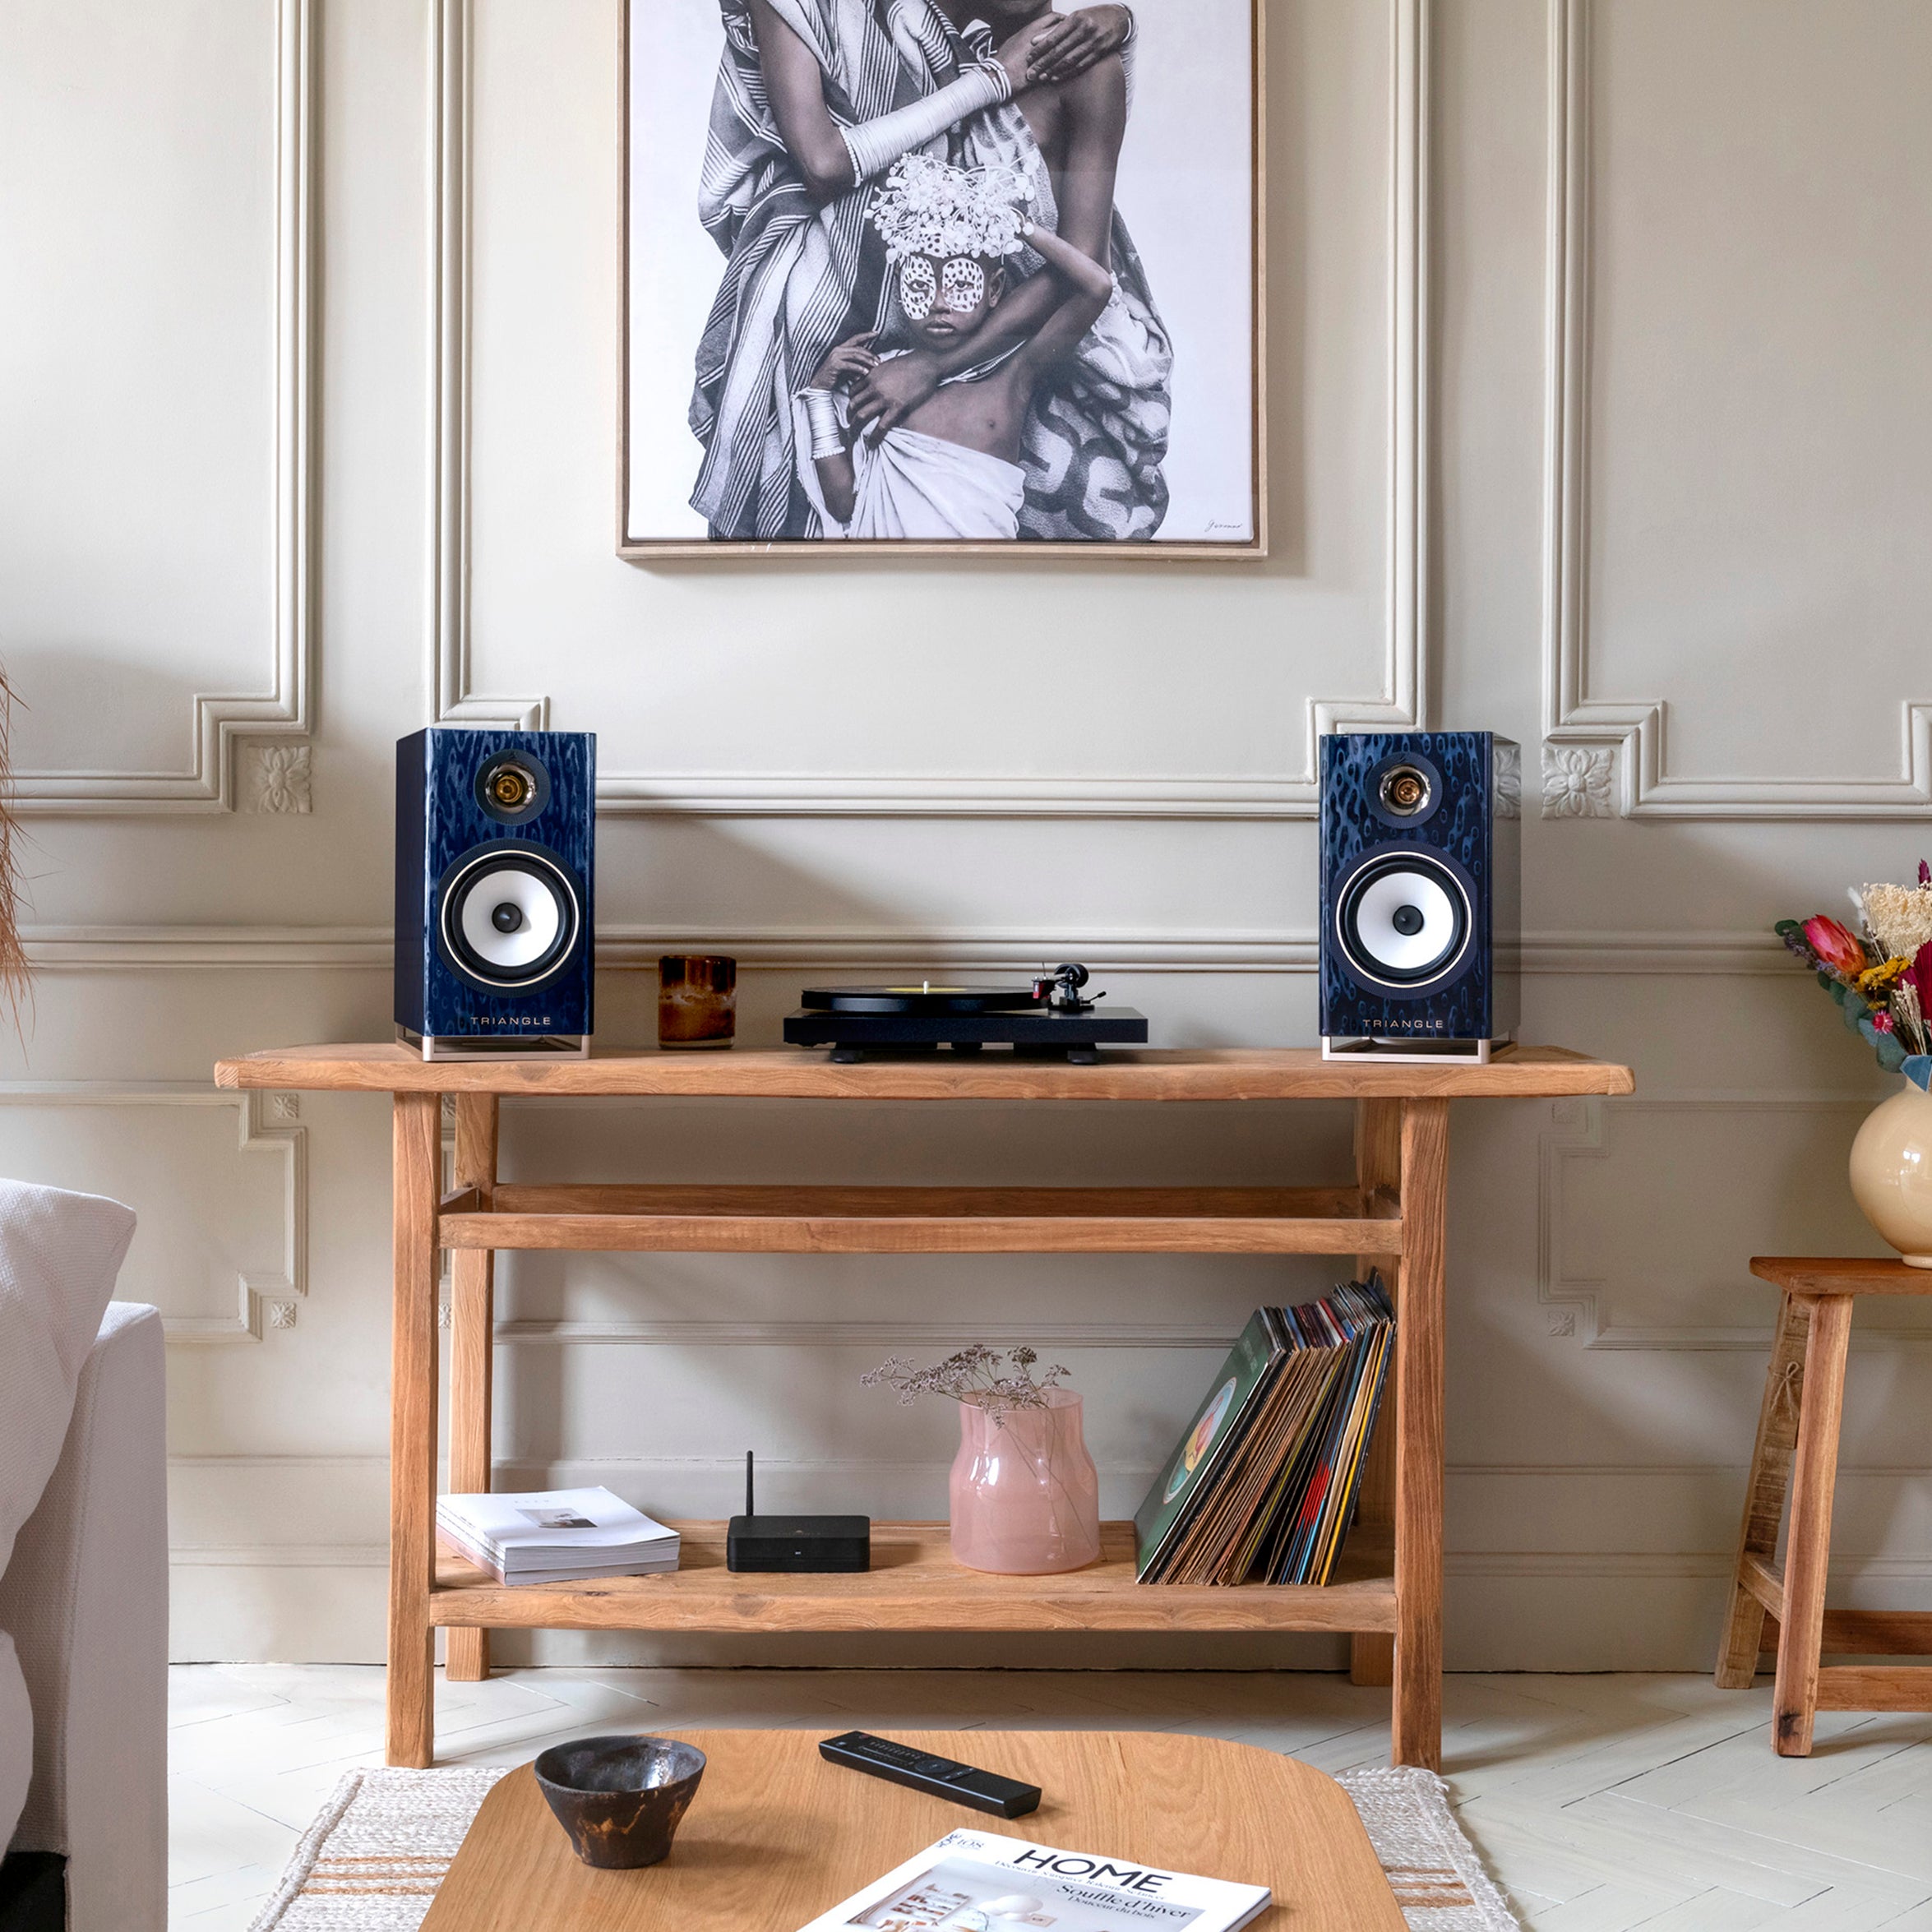 triangle-capella-enceinte-active-wifi-bluetooth-haut-de-gamme-stereo-hub-wisa-streaming-musique-pictures-lifestyle-astral-blue-1